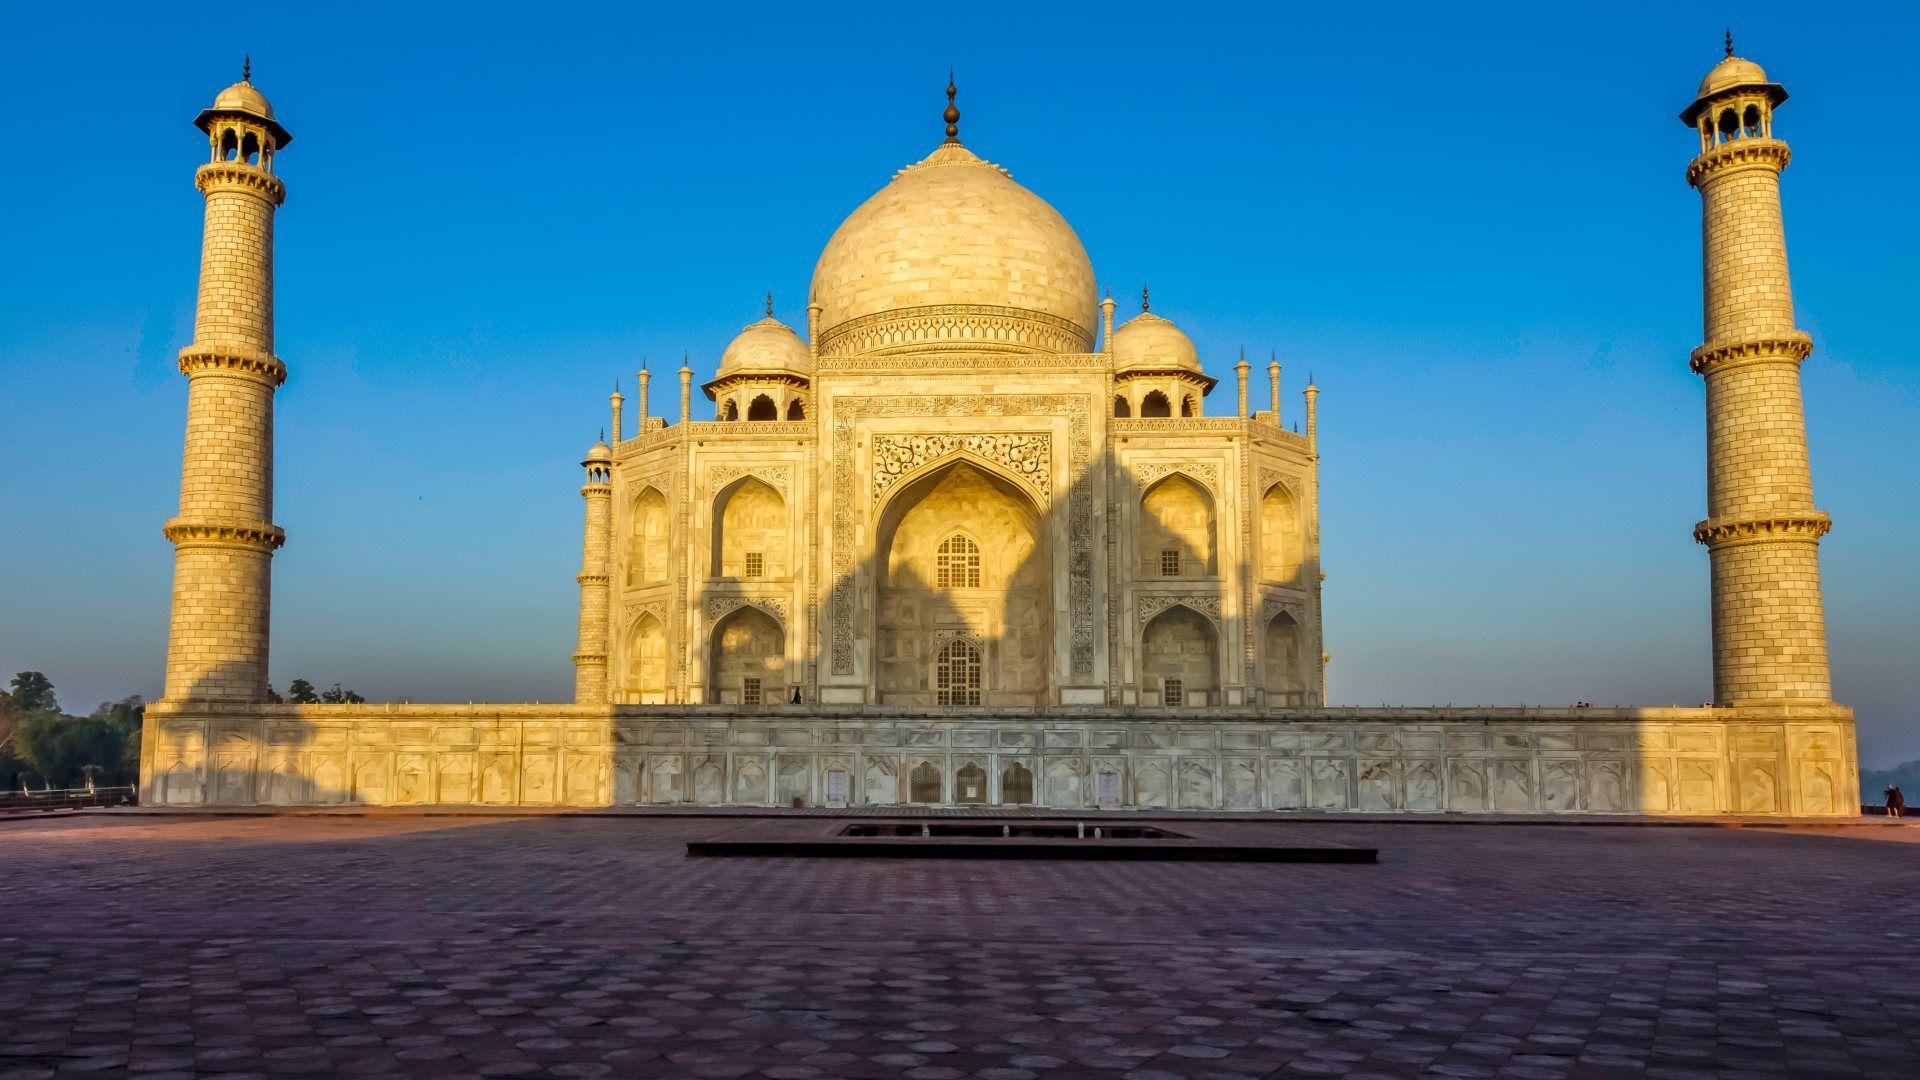 Taj Mahal Wallpapers in HD, 4K and wide sizes